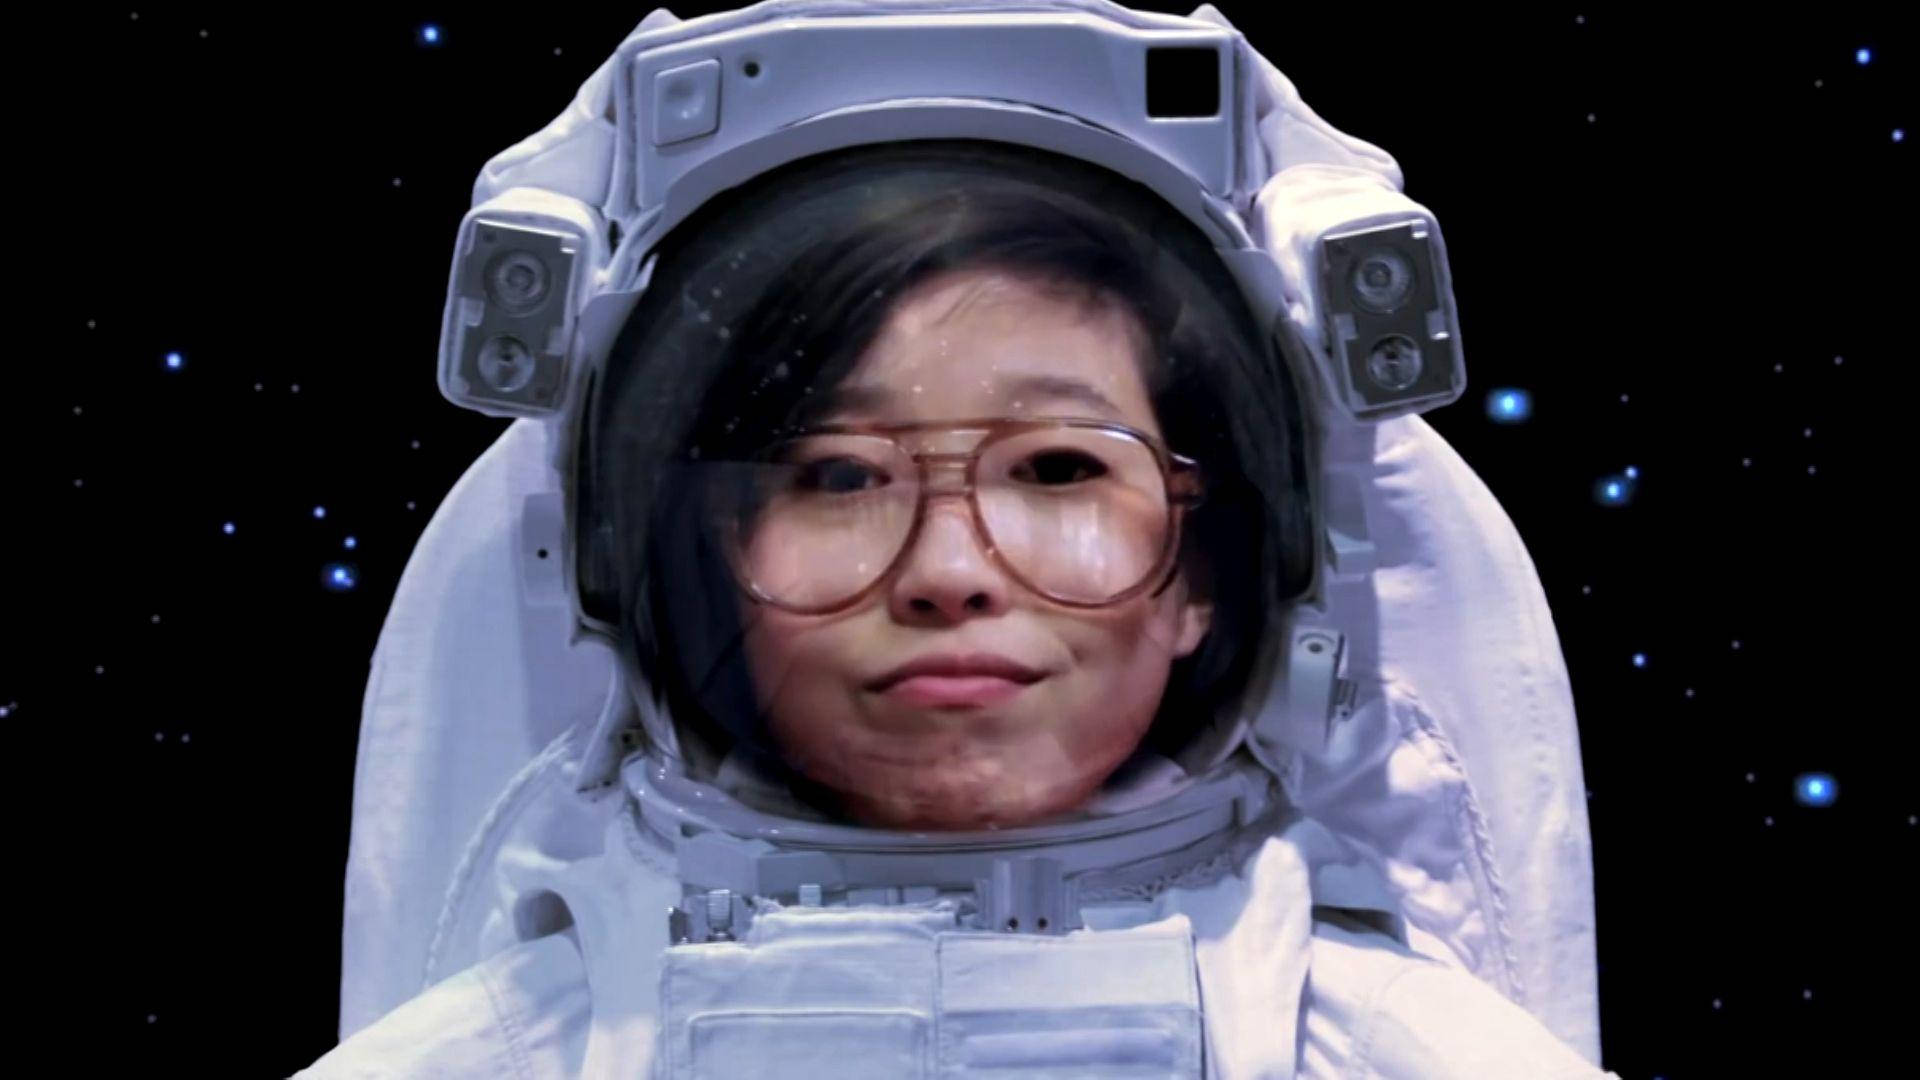 Awkwafina White Astronaut Suit Wallpaper